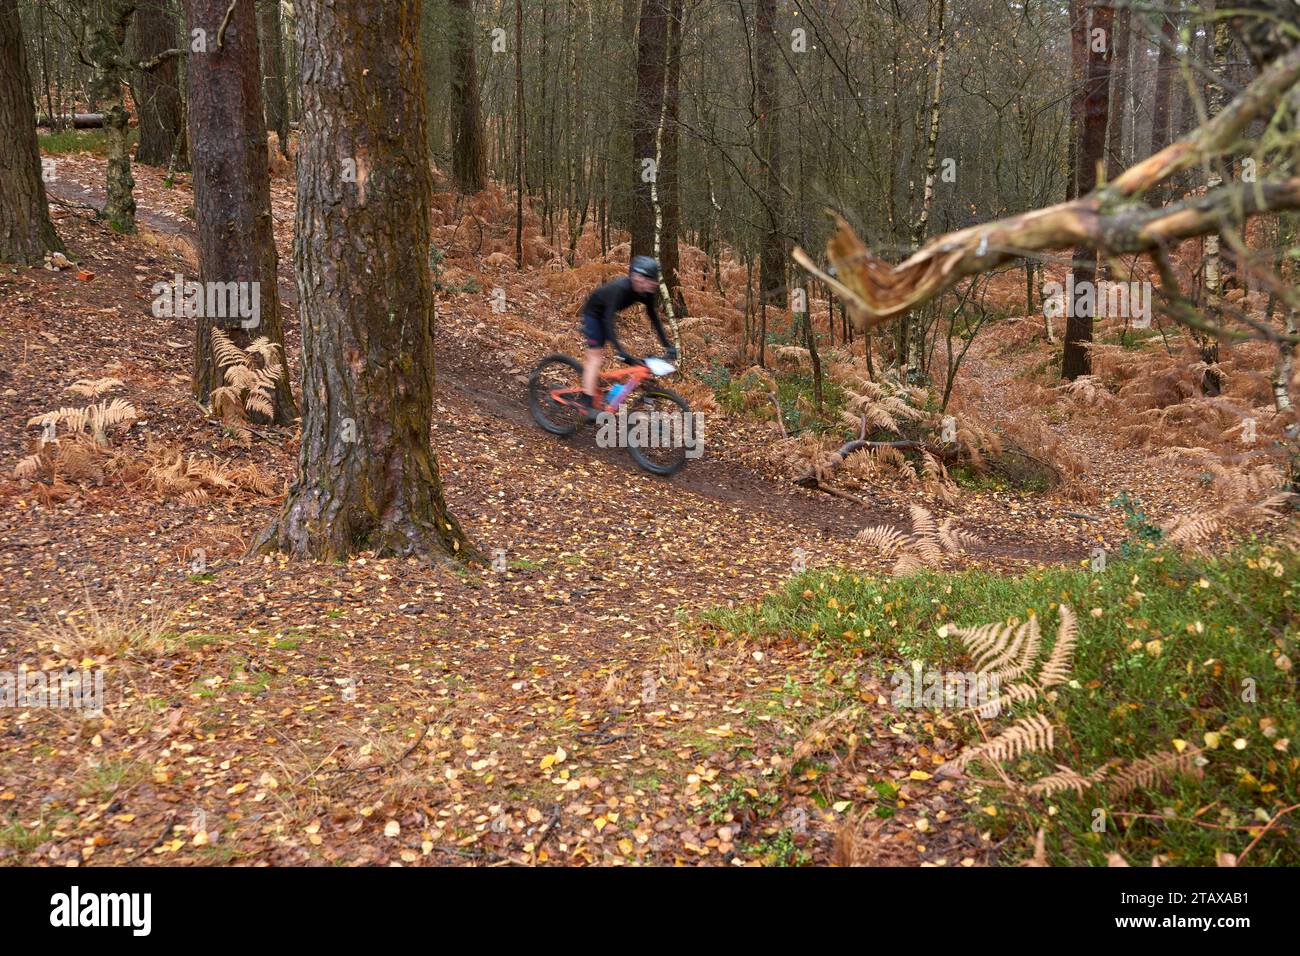 Rider in a XC Cross country race in a forest on a wet day Stock Photo